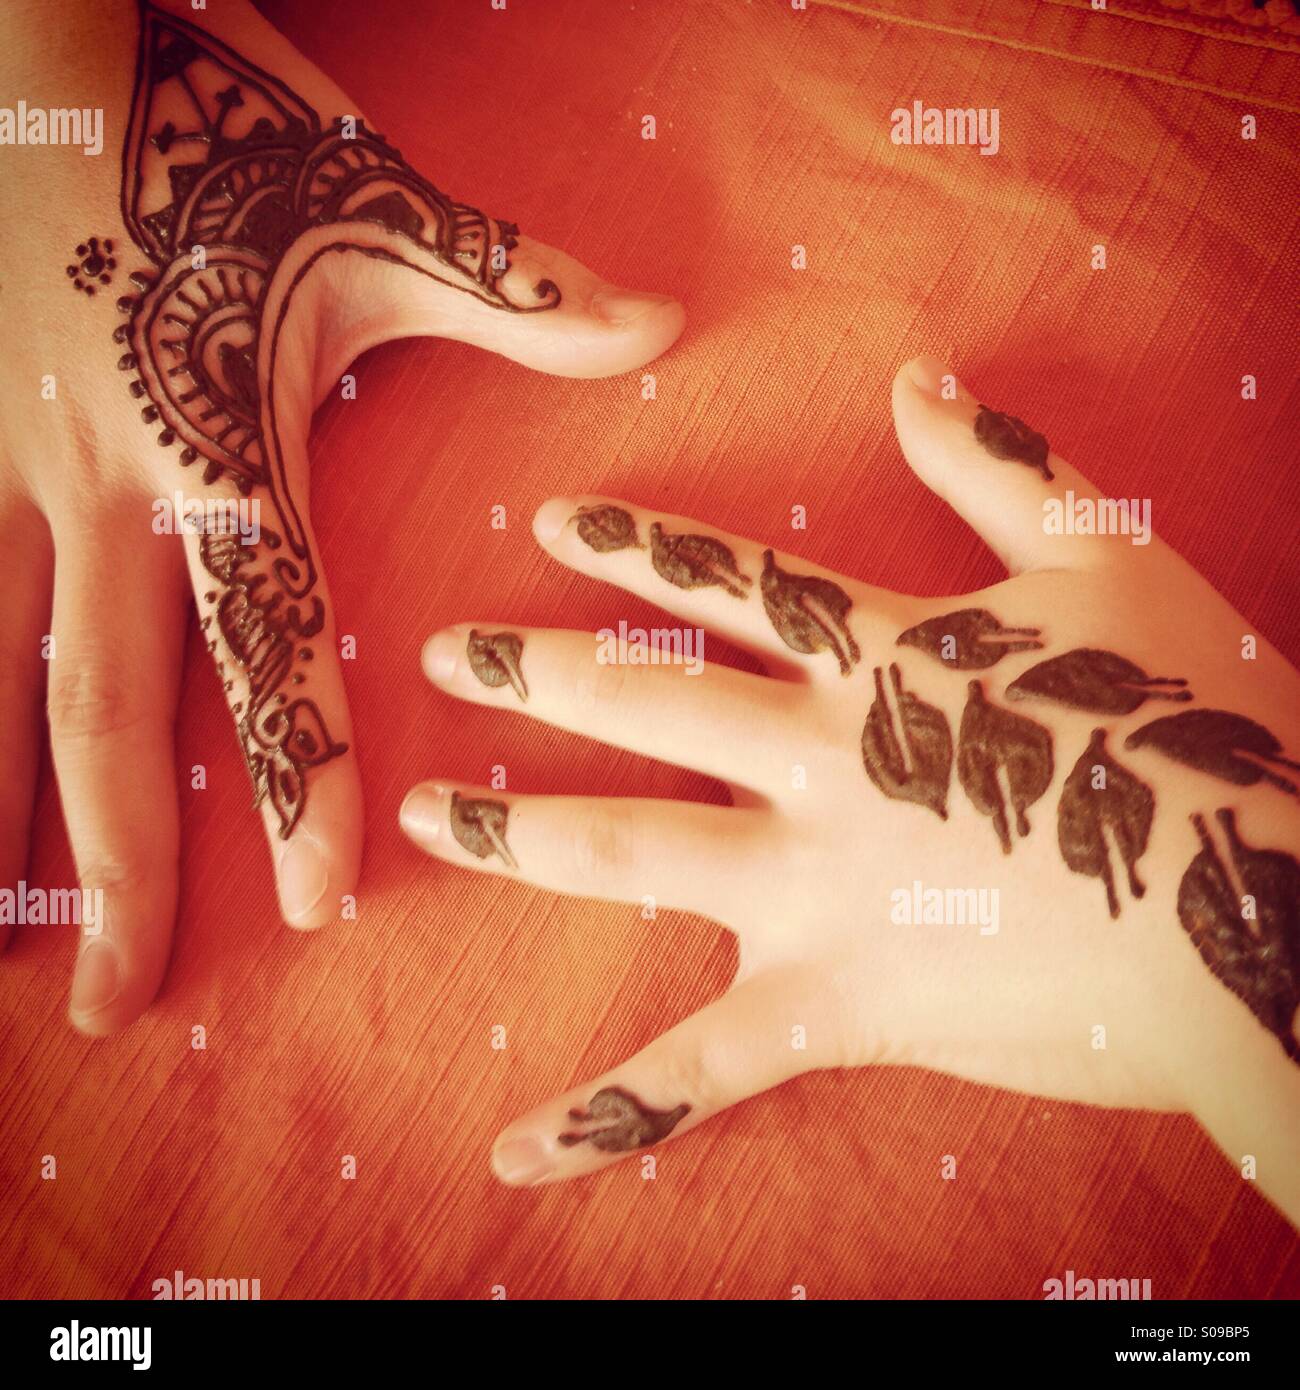 Child and mother's hands with henna paste on them. In Morocco. Stock Photo